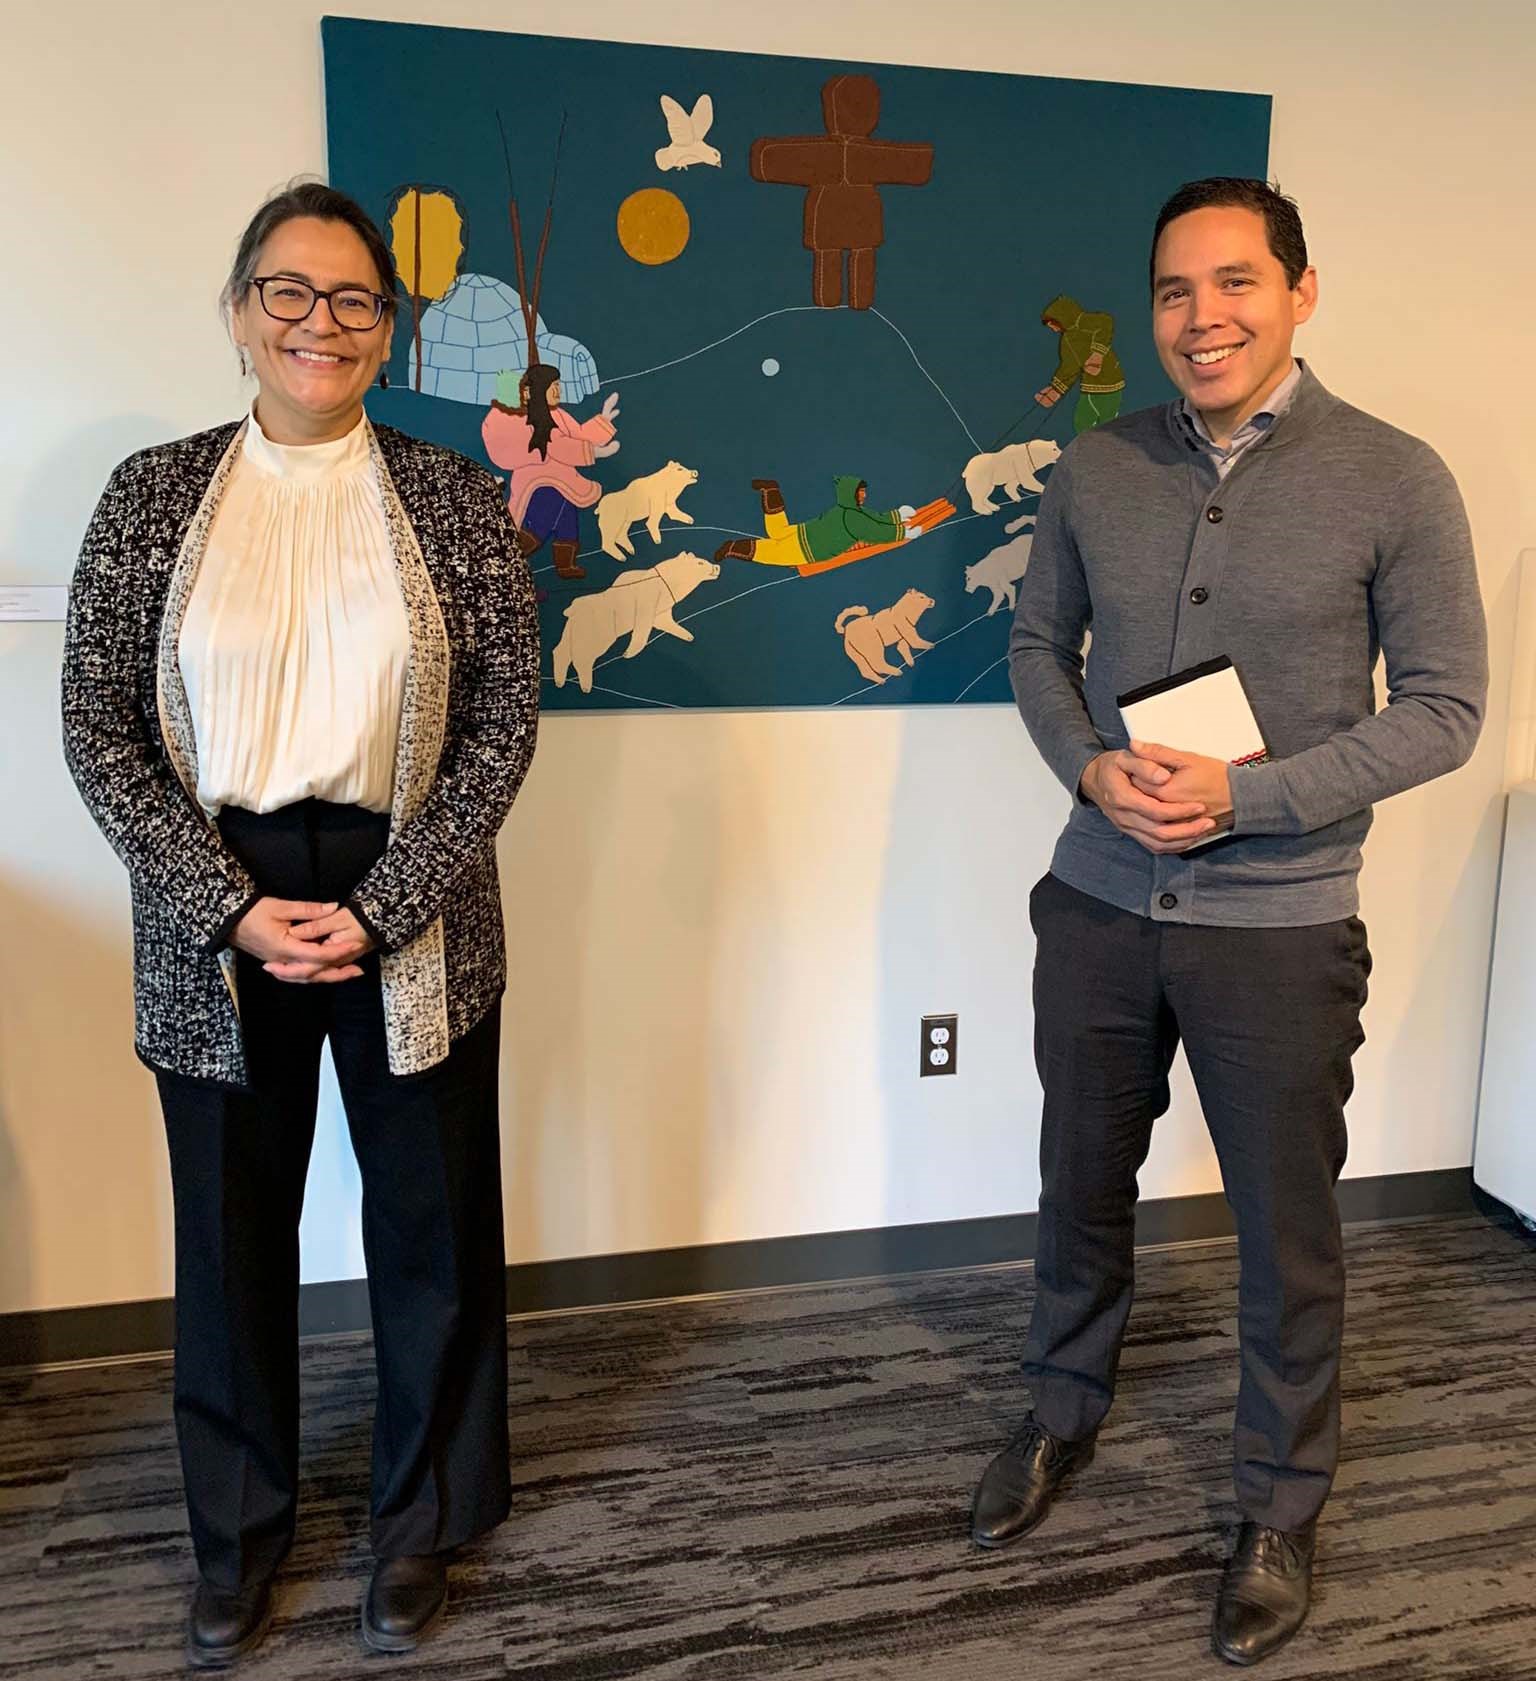 Wednesday, November 24, 2021 – Senator Michèle Audette meets with Natan Obed, president of Inuit Tapiriit Kanatami – Canada’s national Inuit organization in Ottawa, Ontario. Senator Audette spoke with experts on Inuit issues, about their priorities, and how to establish a collaborative relationship.